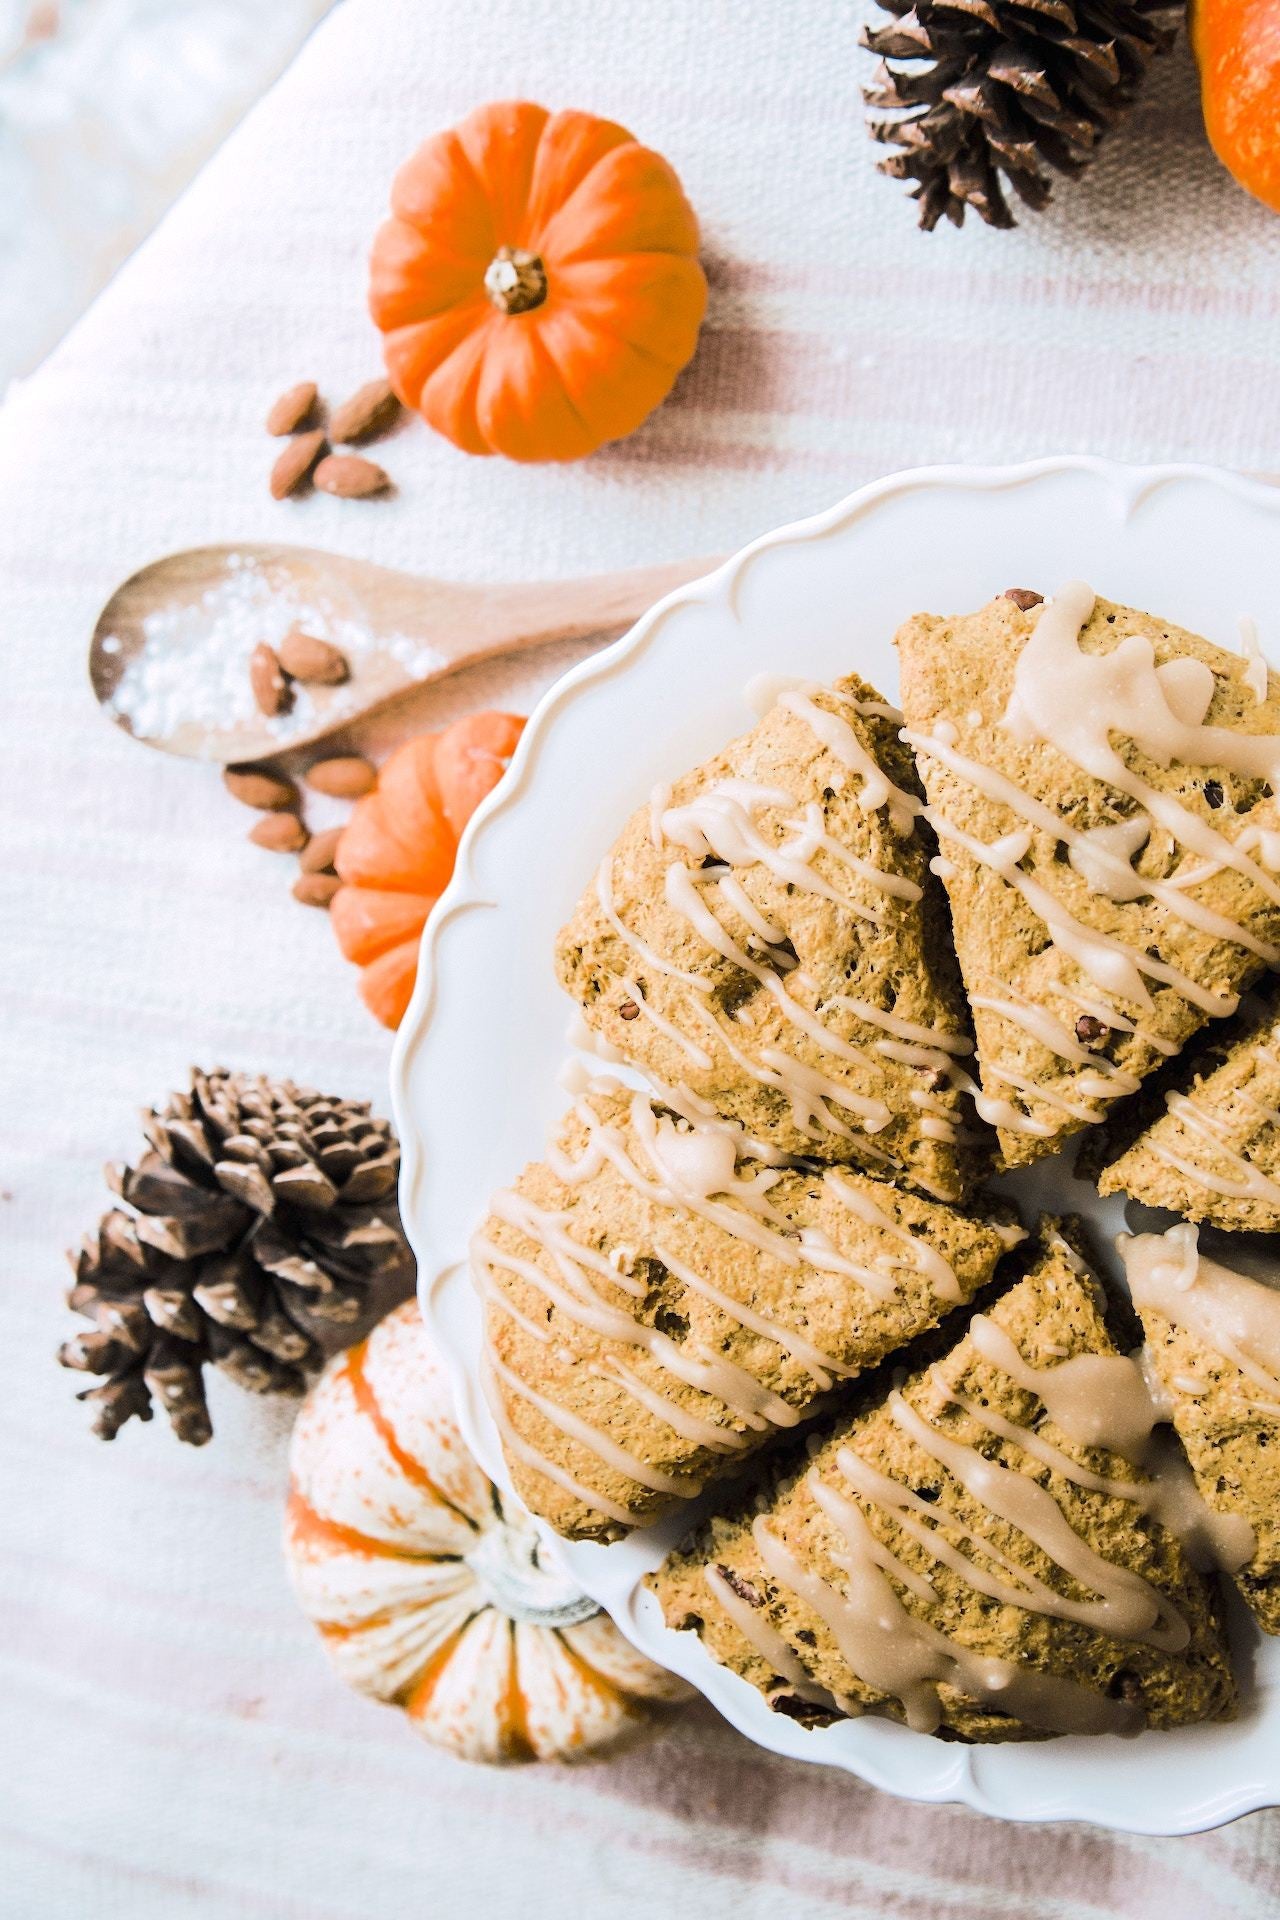 How to eat in the fall and winter? + Plant-based meals to stay healthy during this season -  - Forest Homes